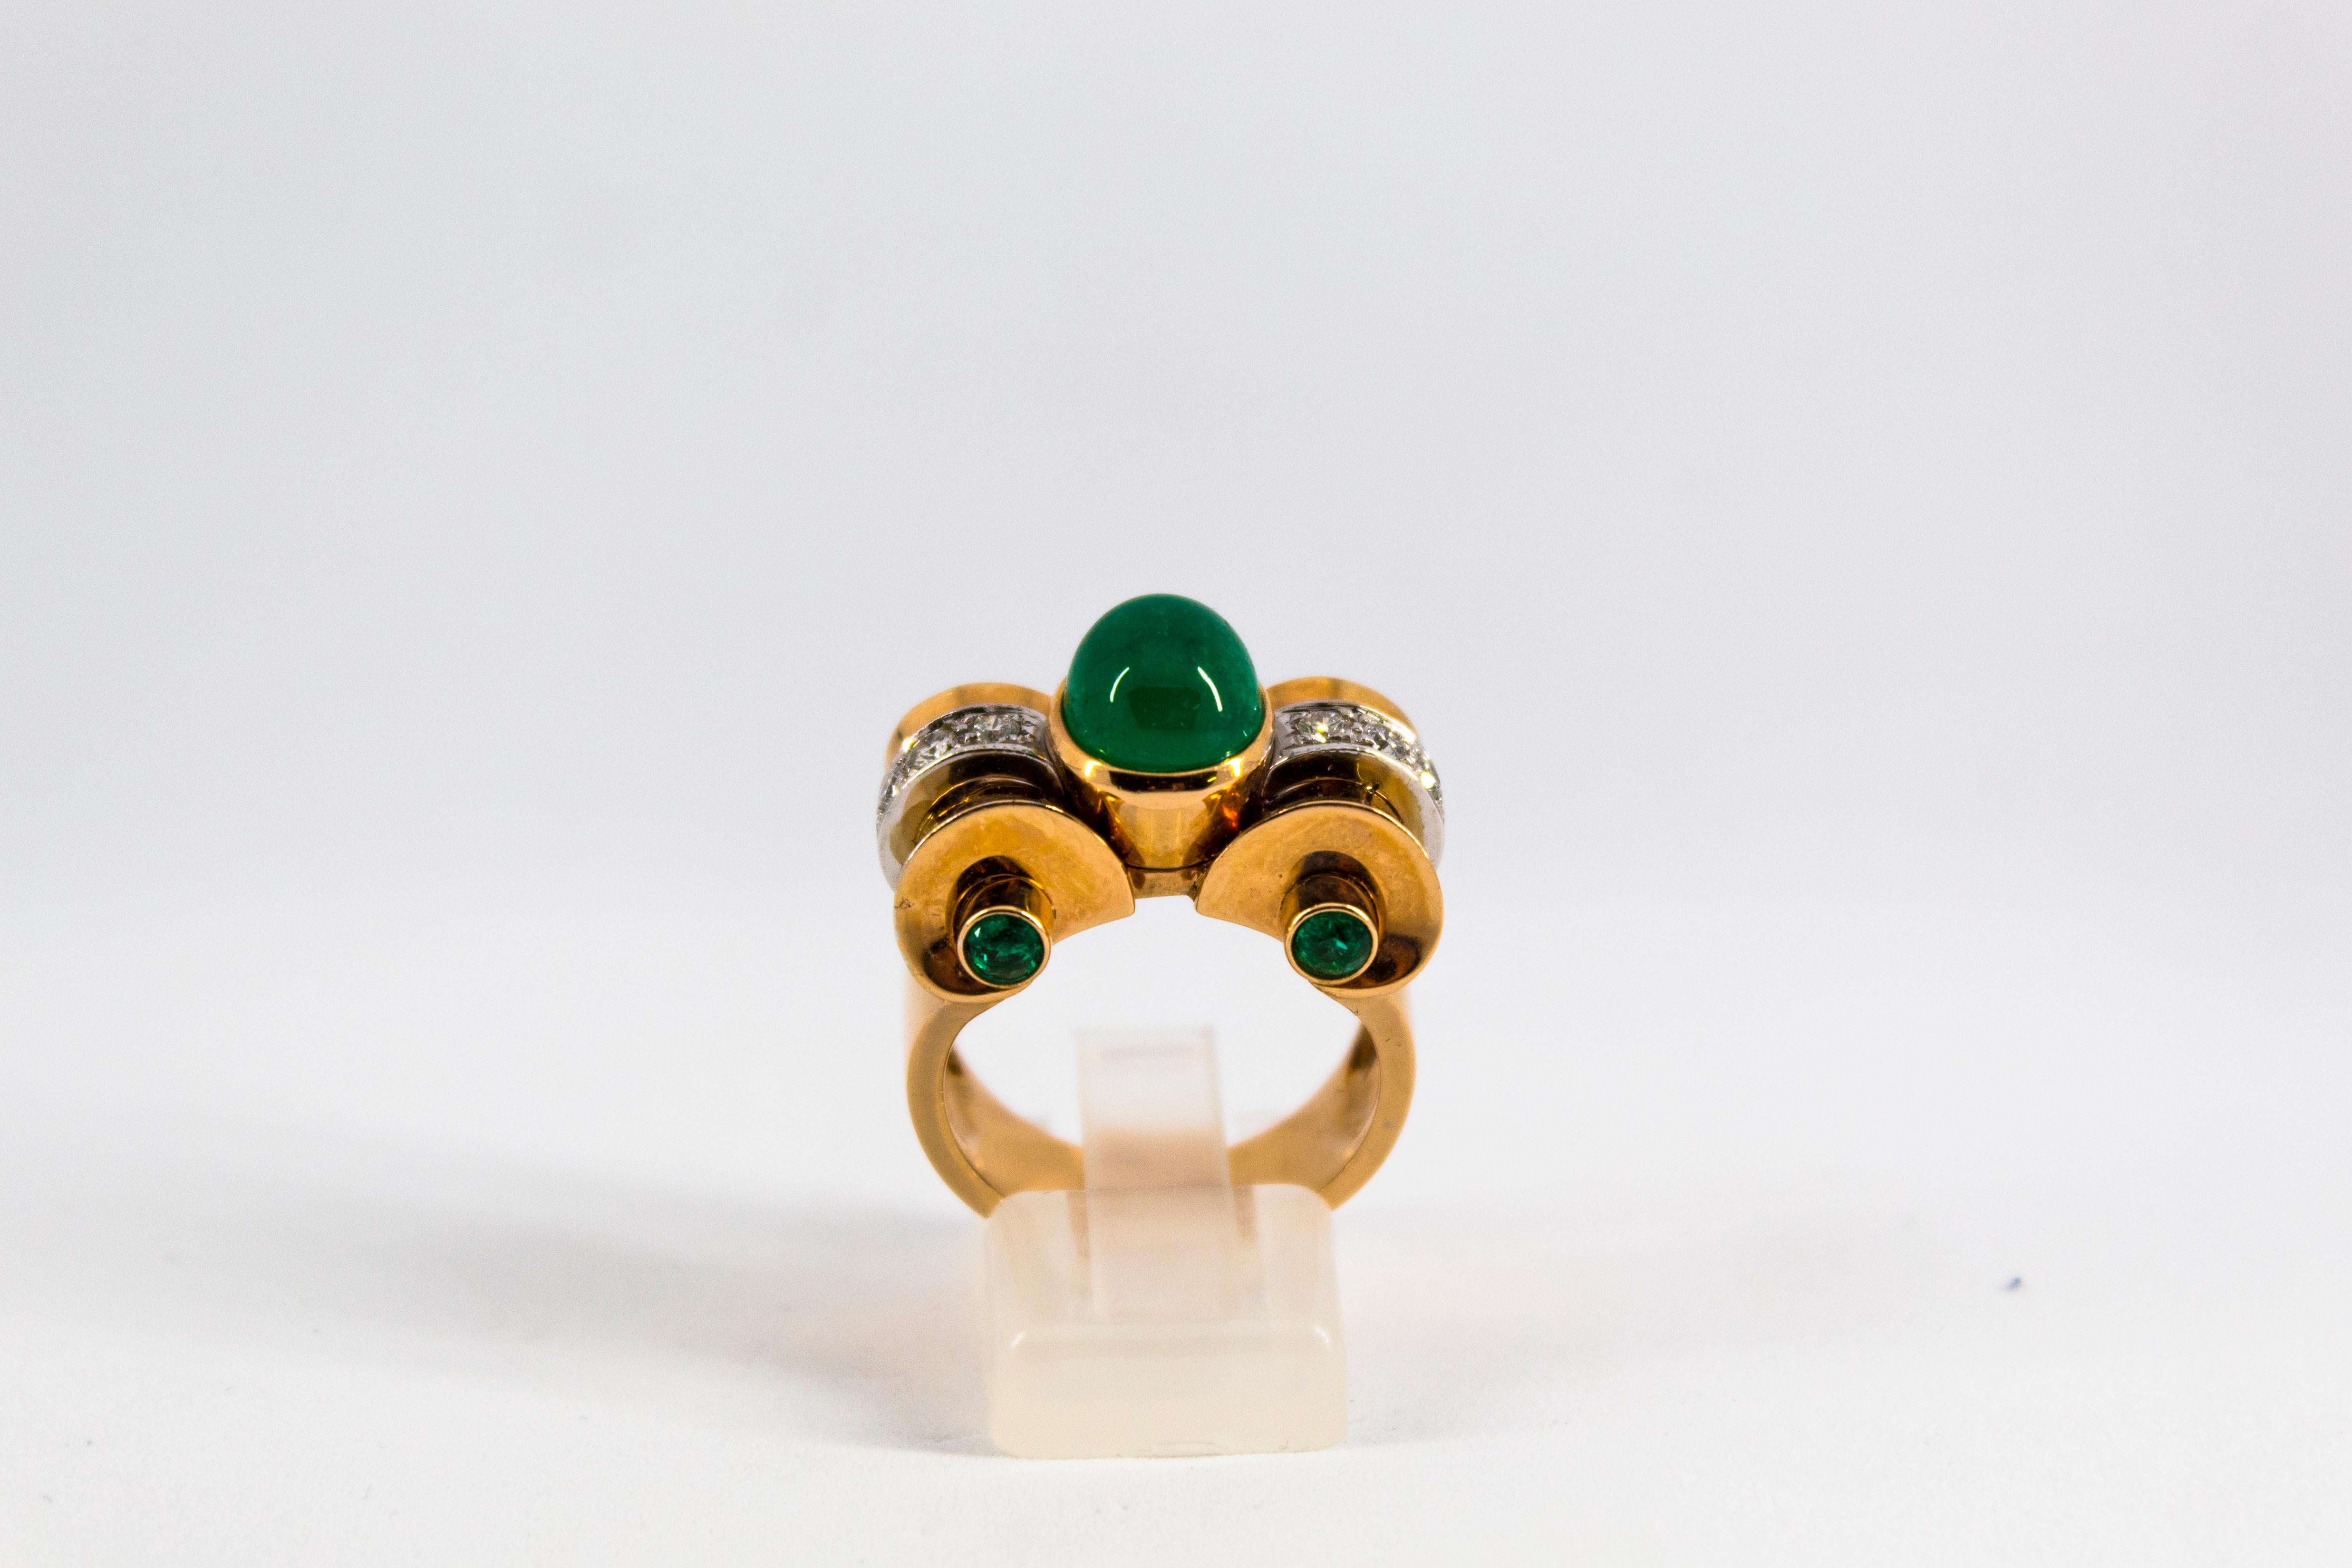 This Ring is made of 14K Yellow Gold.
This Ring has 0.50 Carats of White Diamonds.
This Ring has 3.50 Carats of Emeralds.
Size ITA: 15 USA: 7 1/4
We're a workshop so every piece is handmade, customizable and resizable.